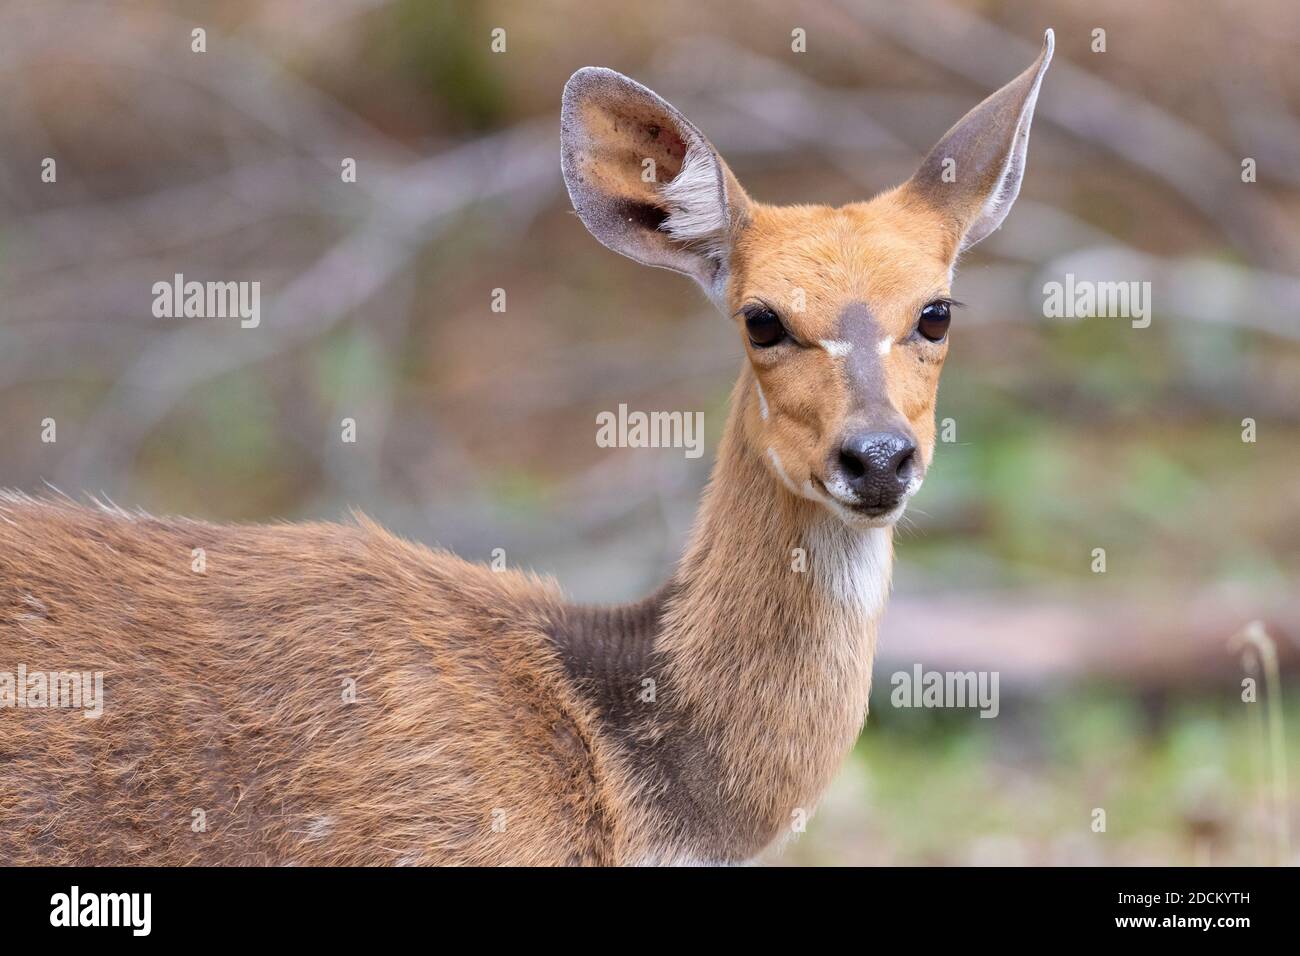 Harnessed Bushbuck (Tragelaphus scriptus), close-up of an adult female, Mpumalanga, South Africa Stock Photo